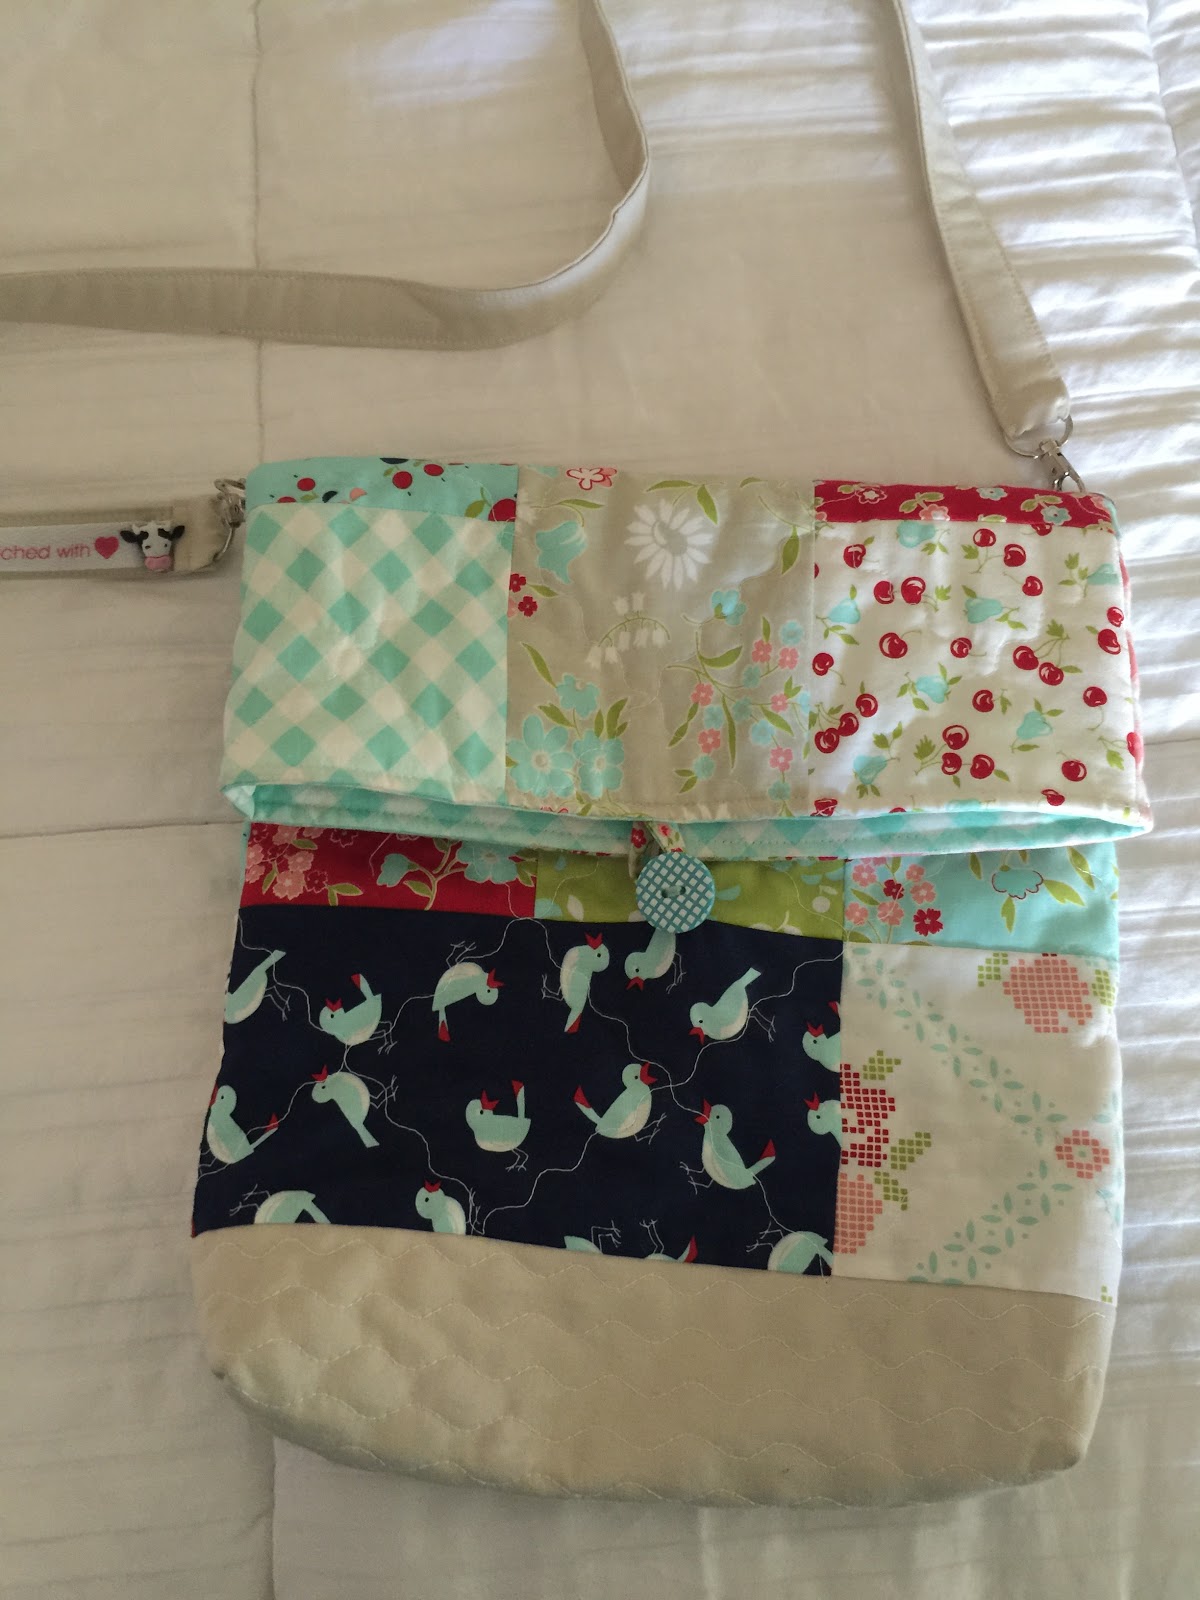 dream quilt create: A View of my Sewing Room and more Quilty Fun Gifts